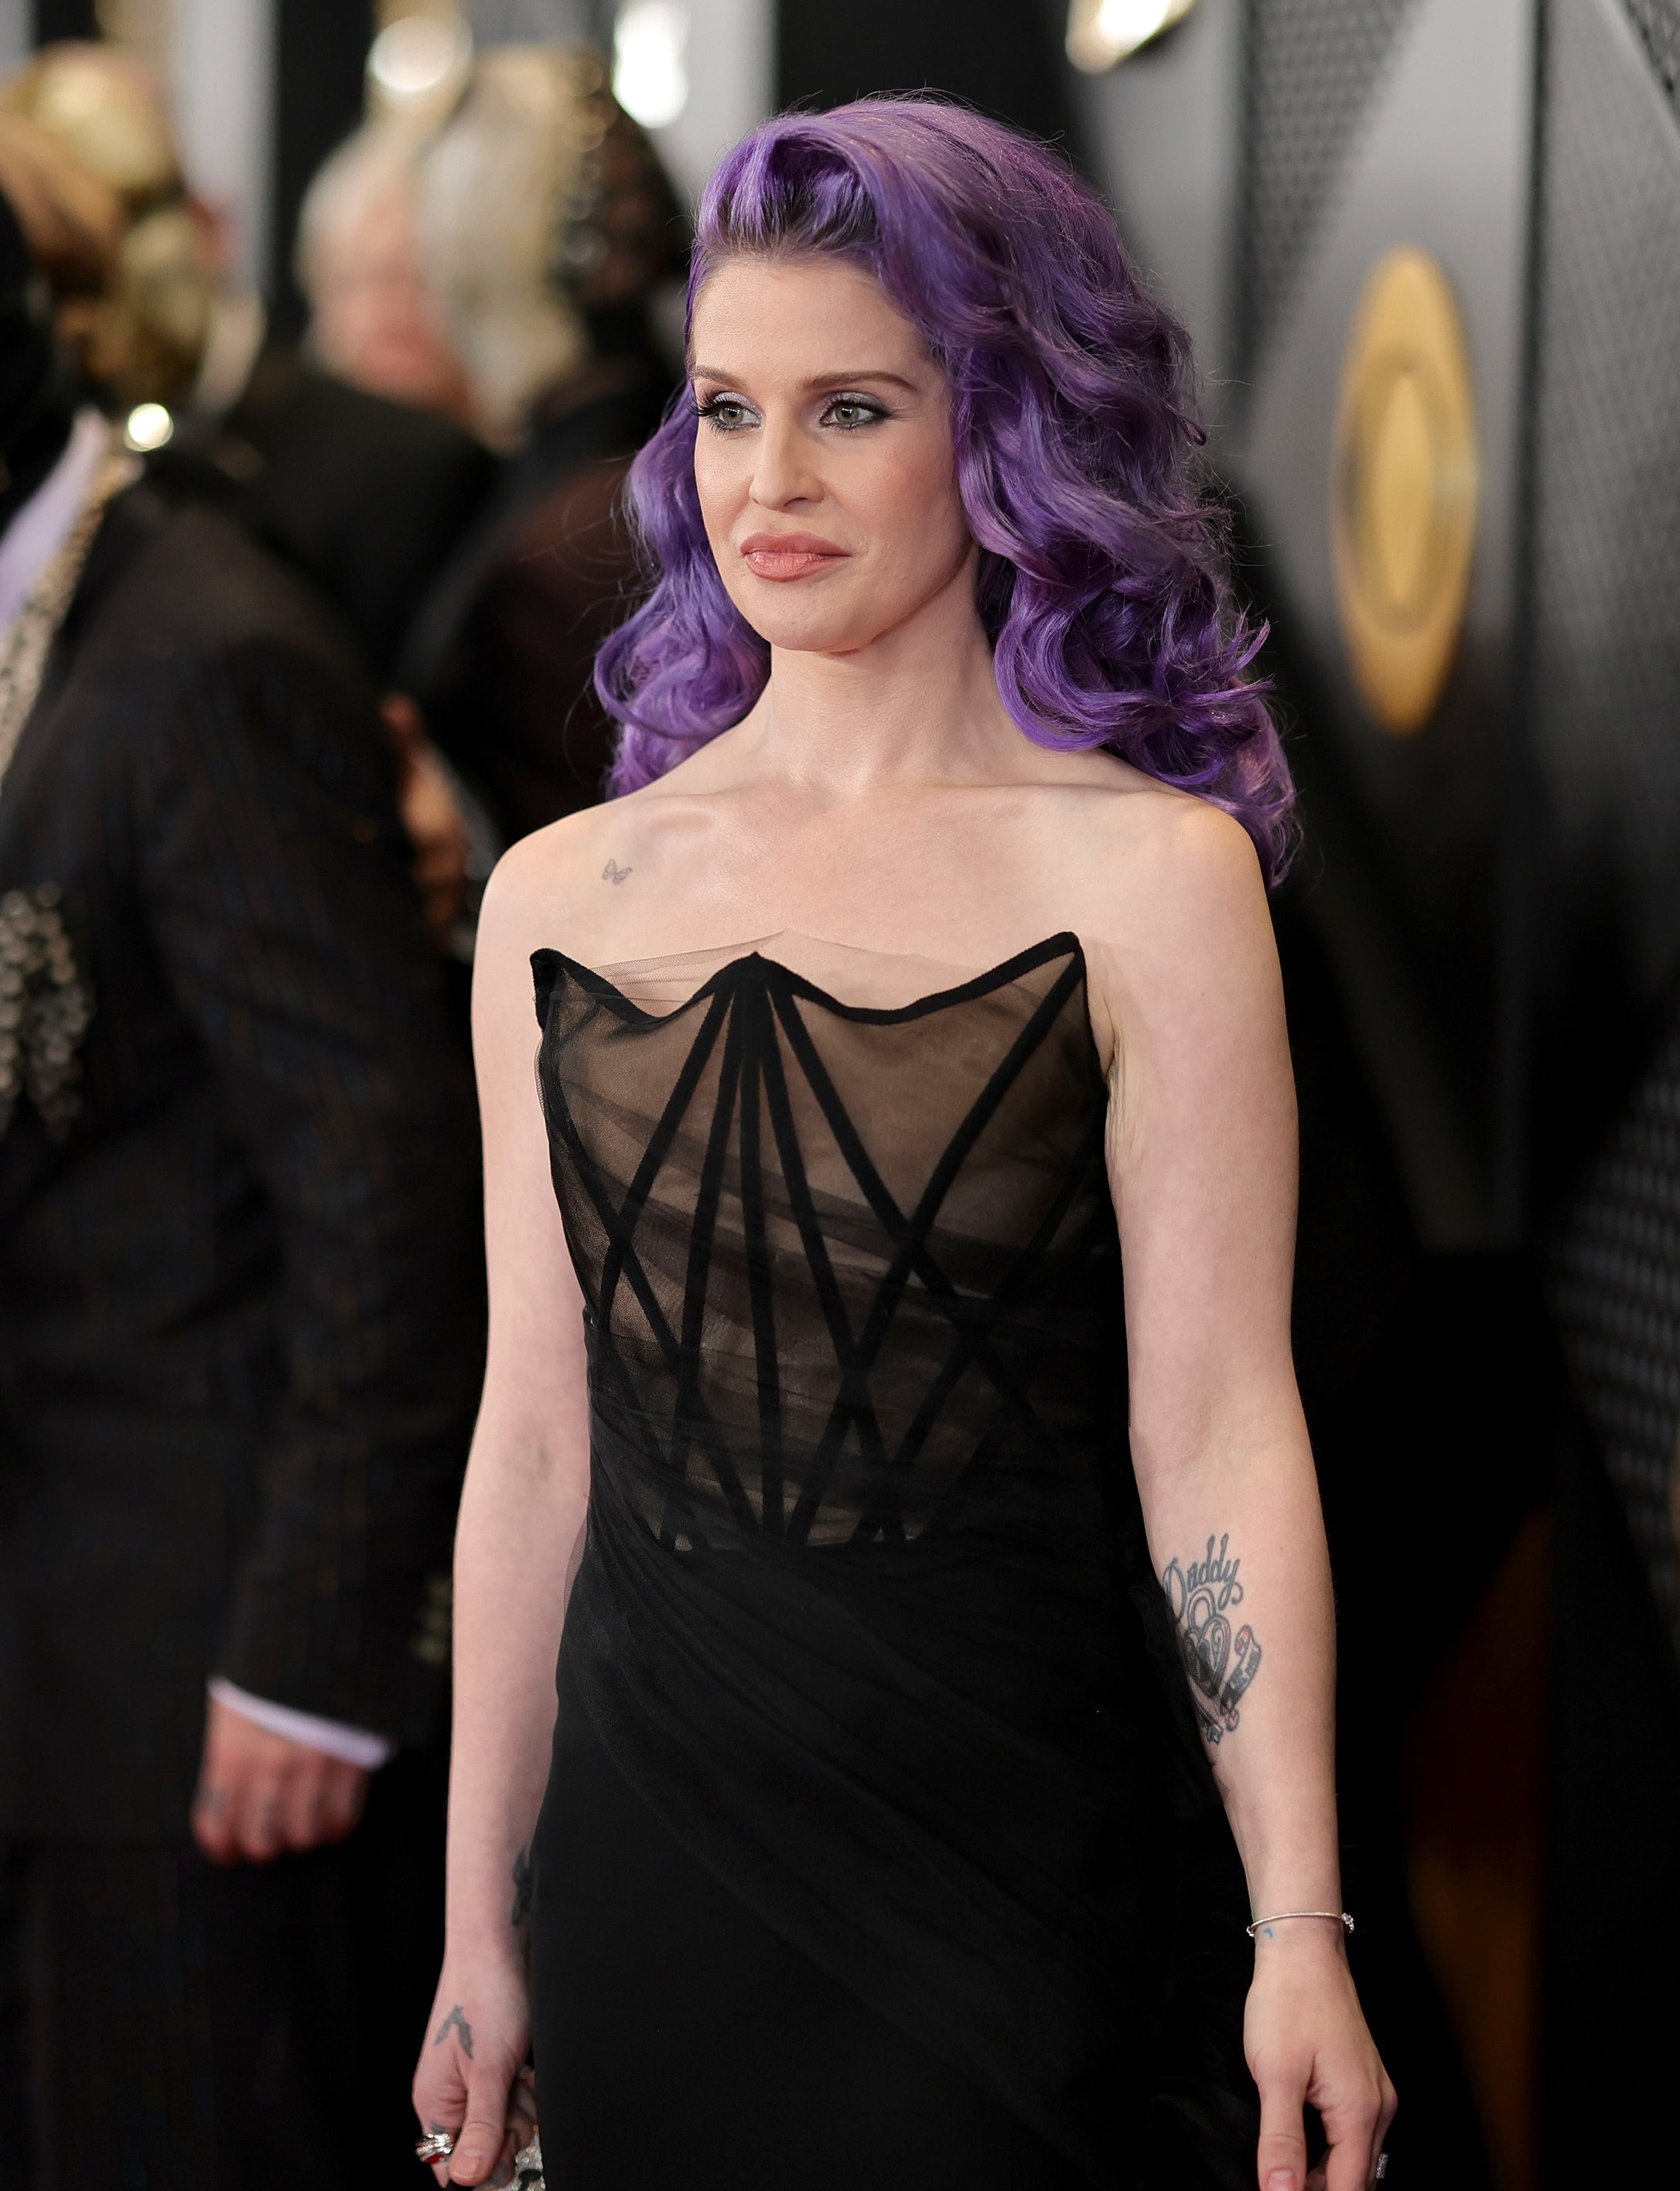 Woman with purple hair in a black dress on the red carpet